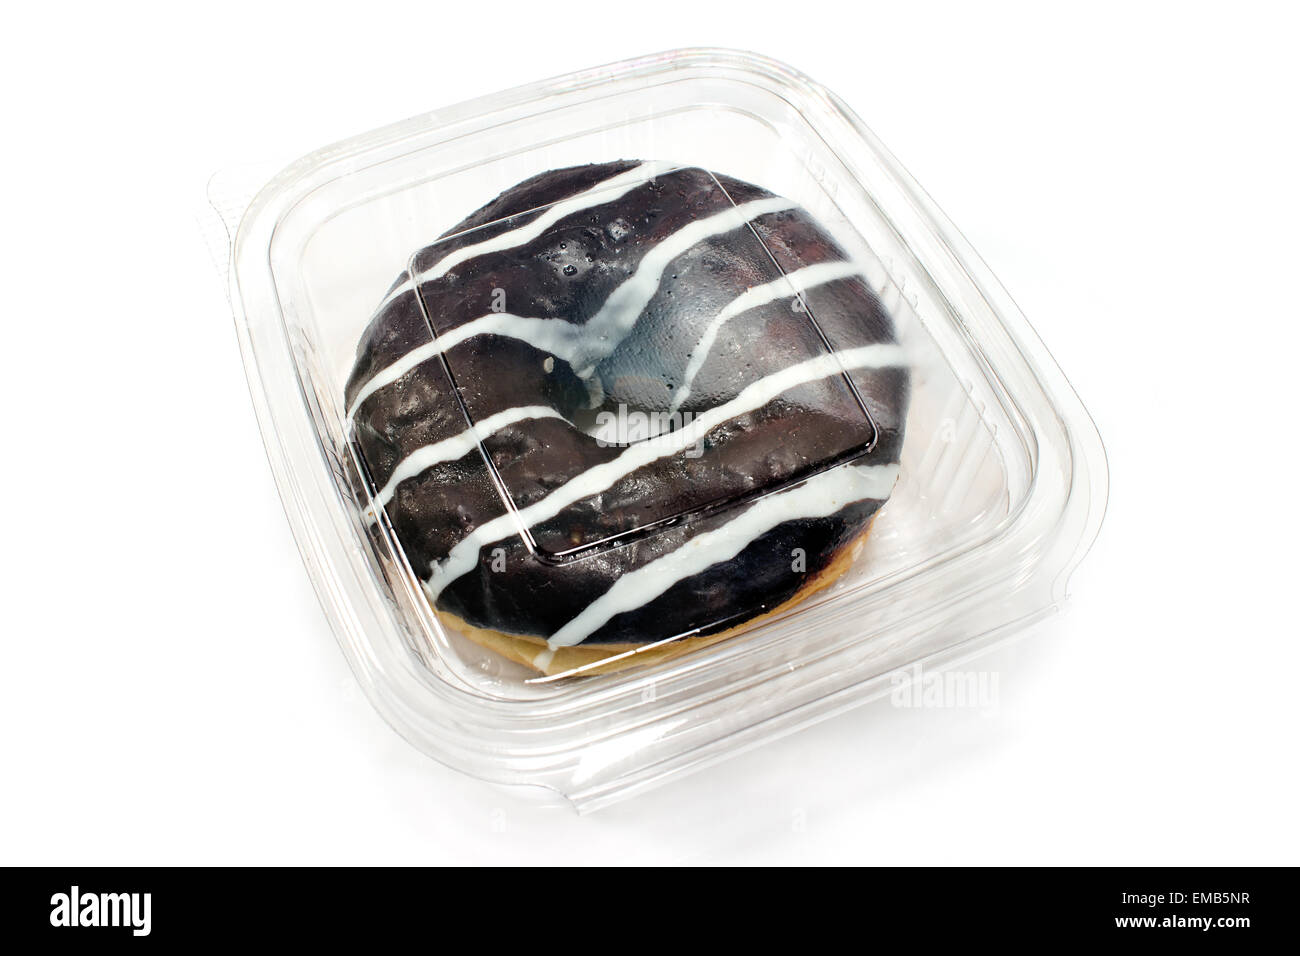 Donut in chocolate glaze in plastic box isolated on white Stock Photo